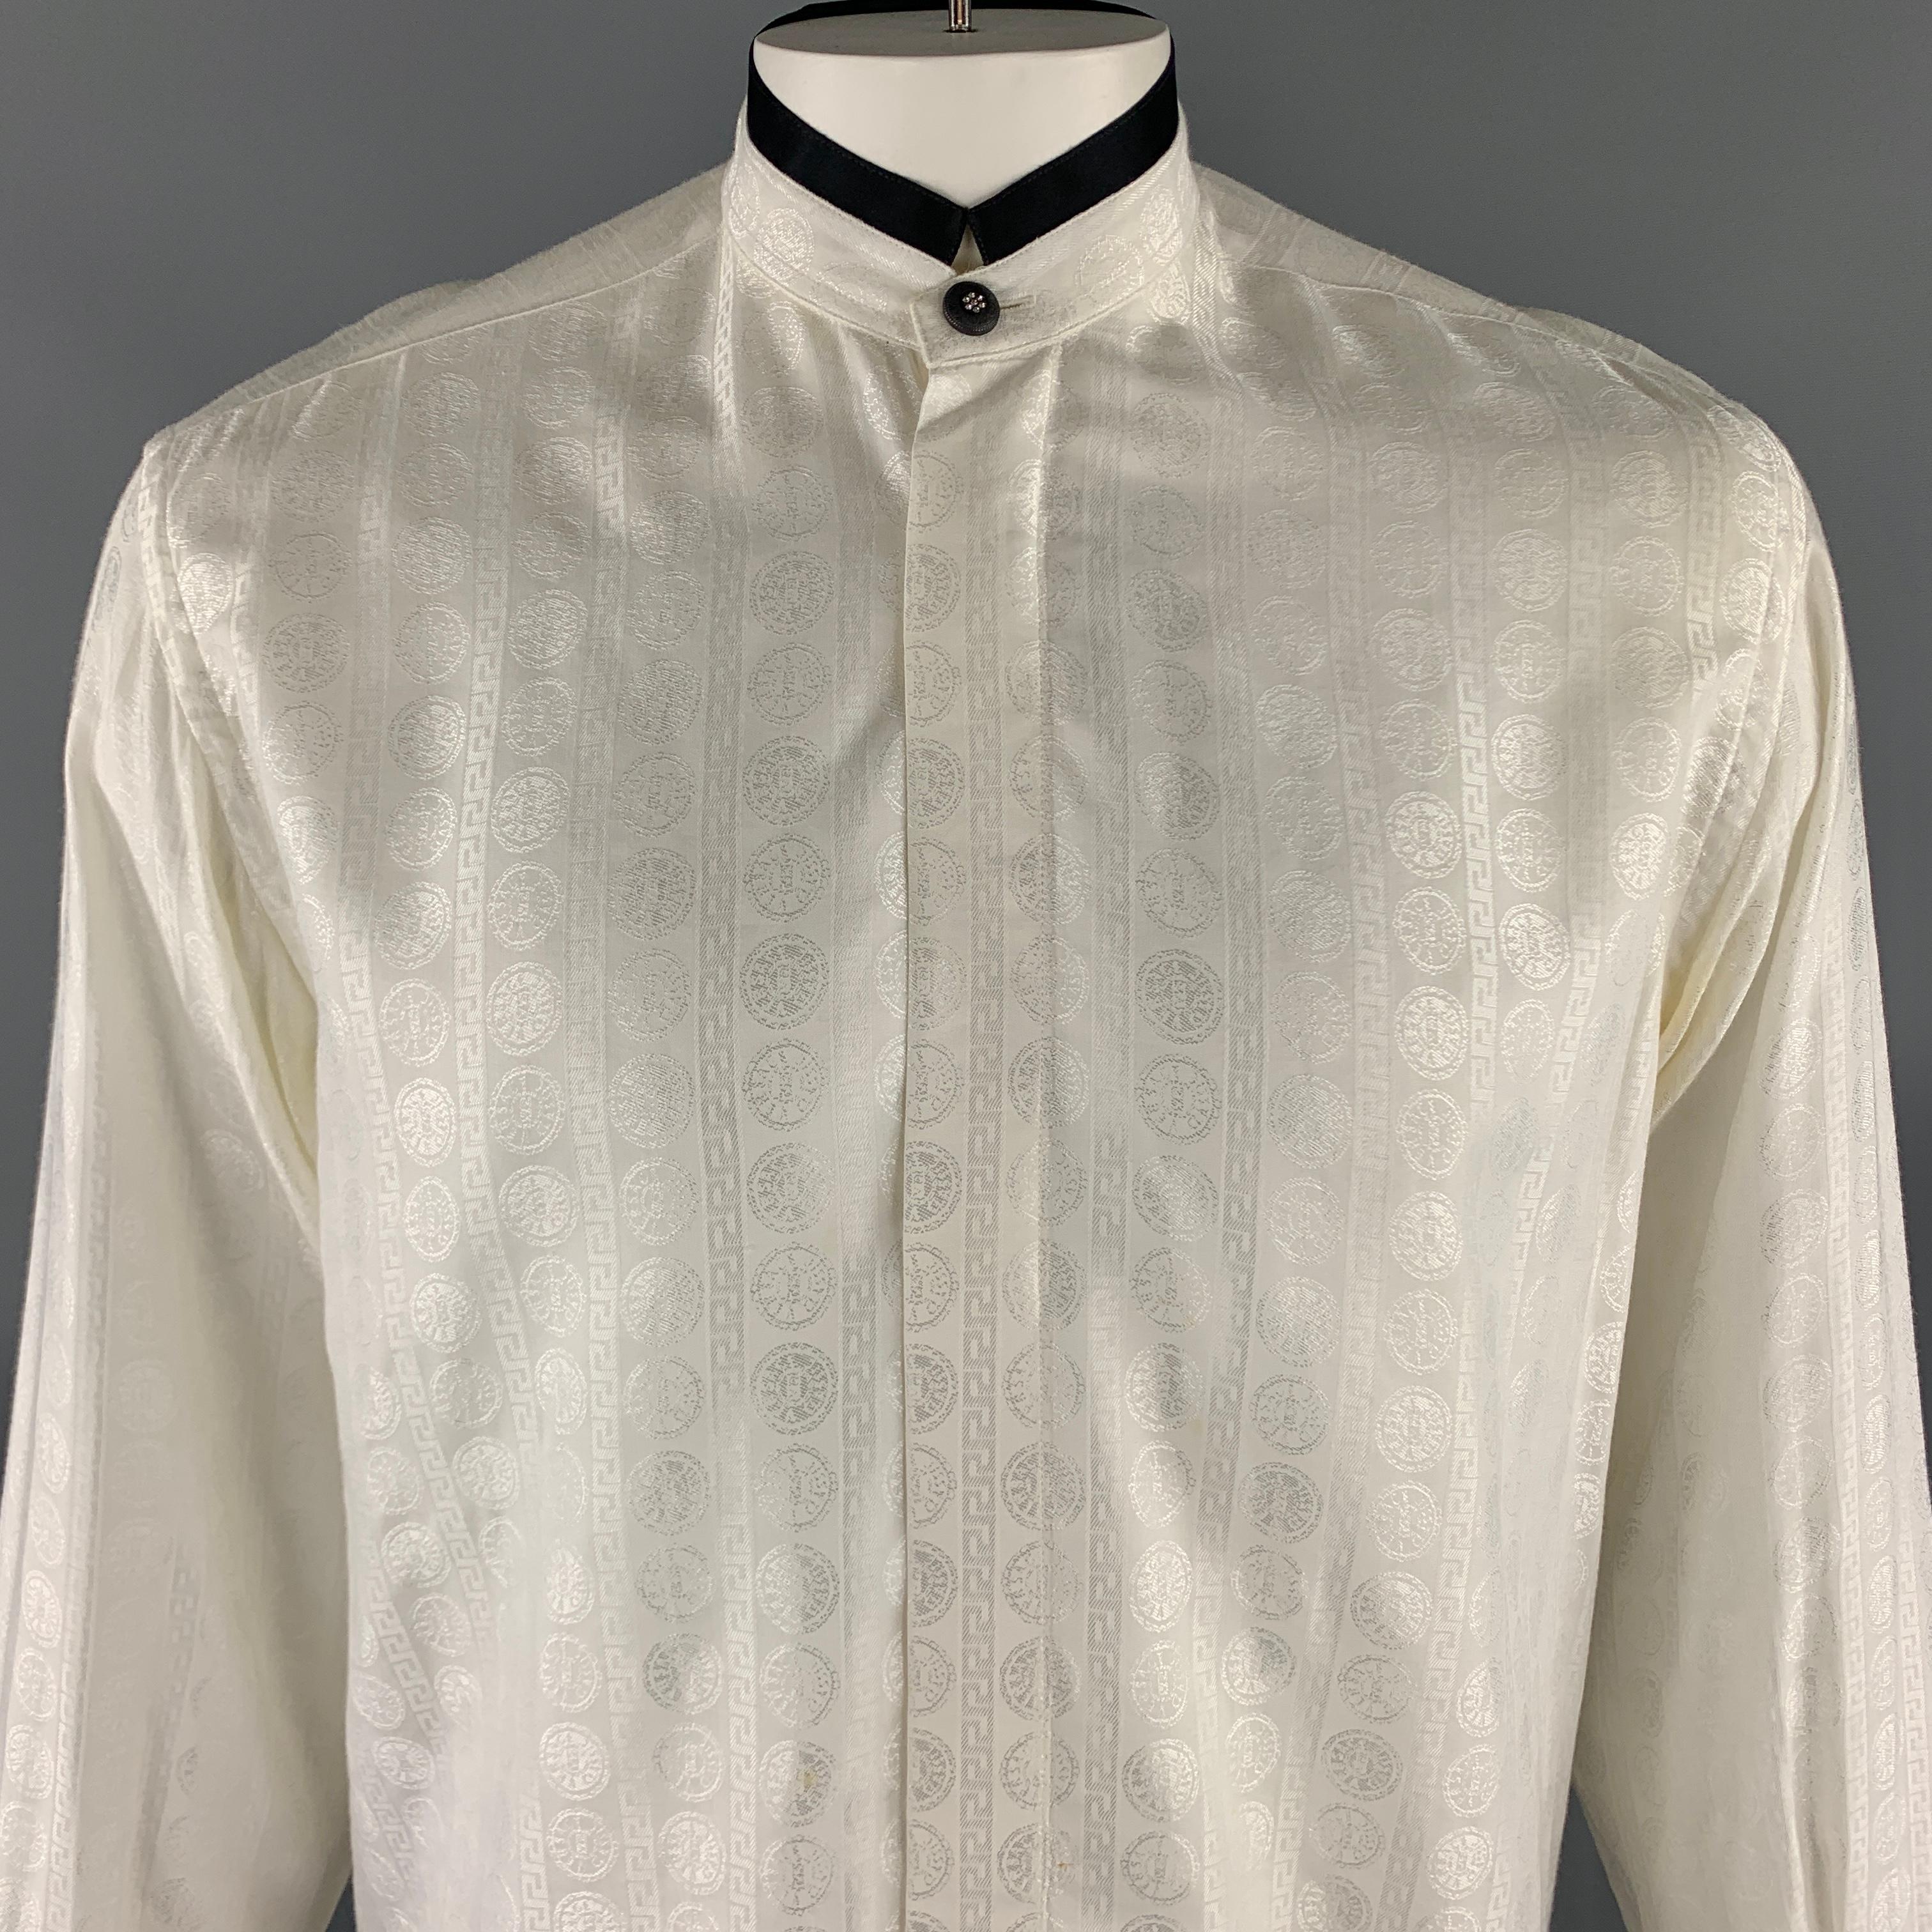 Vintage V2 by VERSACE long sleeve shirt comes in a textured cream cotton / viscose material, featuring a nehru collar, a contrast black trim, a rhinestone embellished button at collar and cuffs, and hidden buttons at closure. As is. Made in